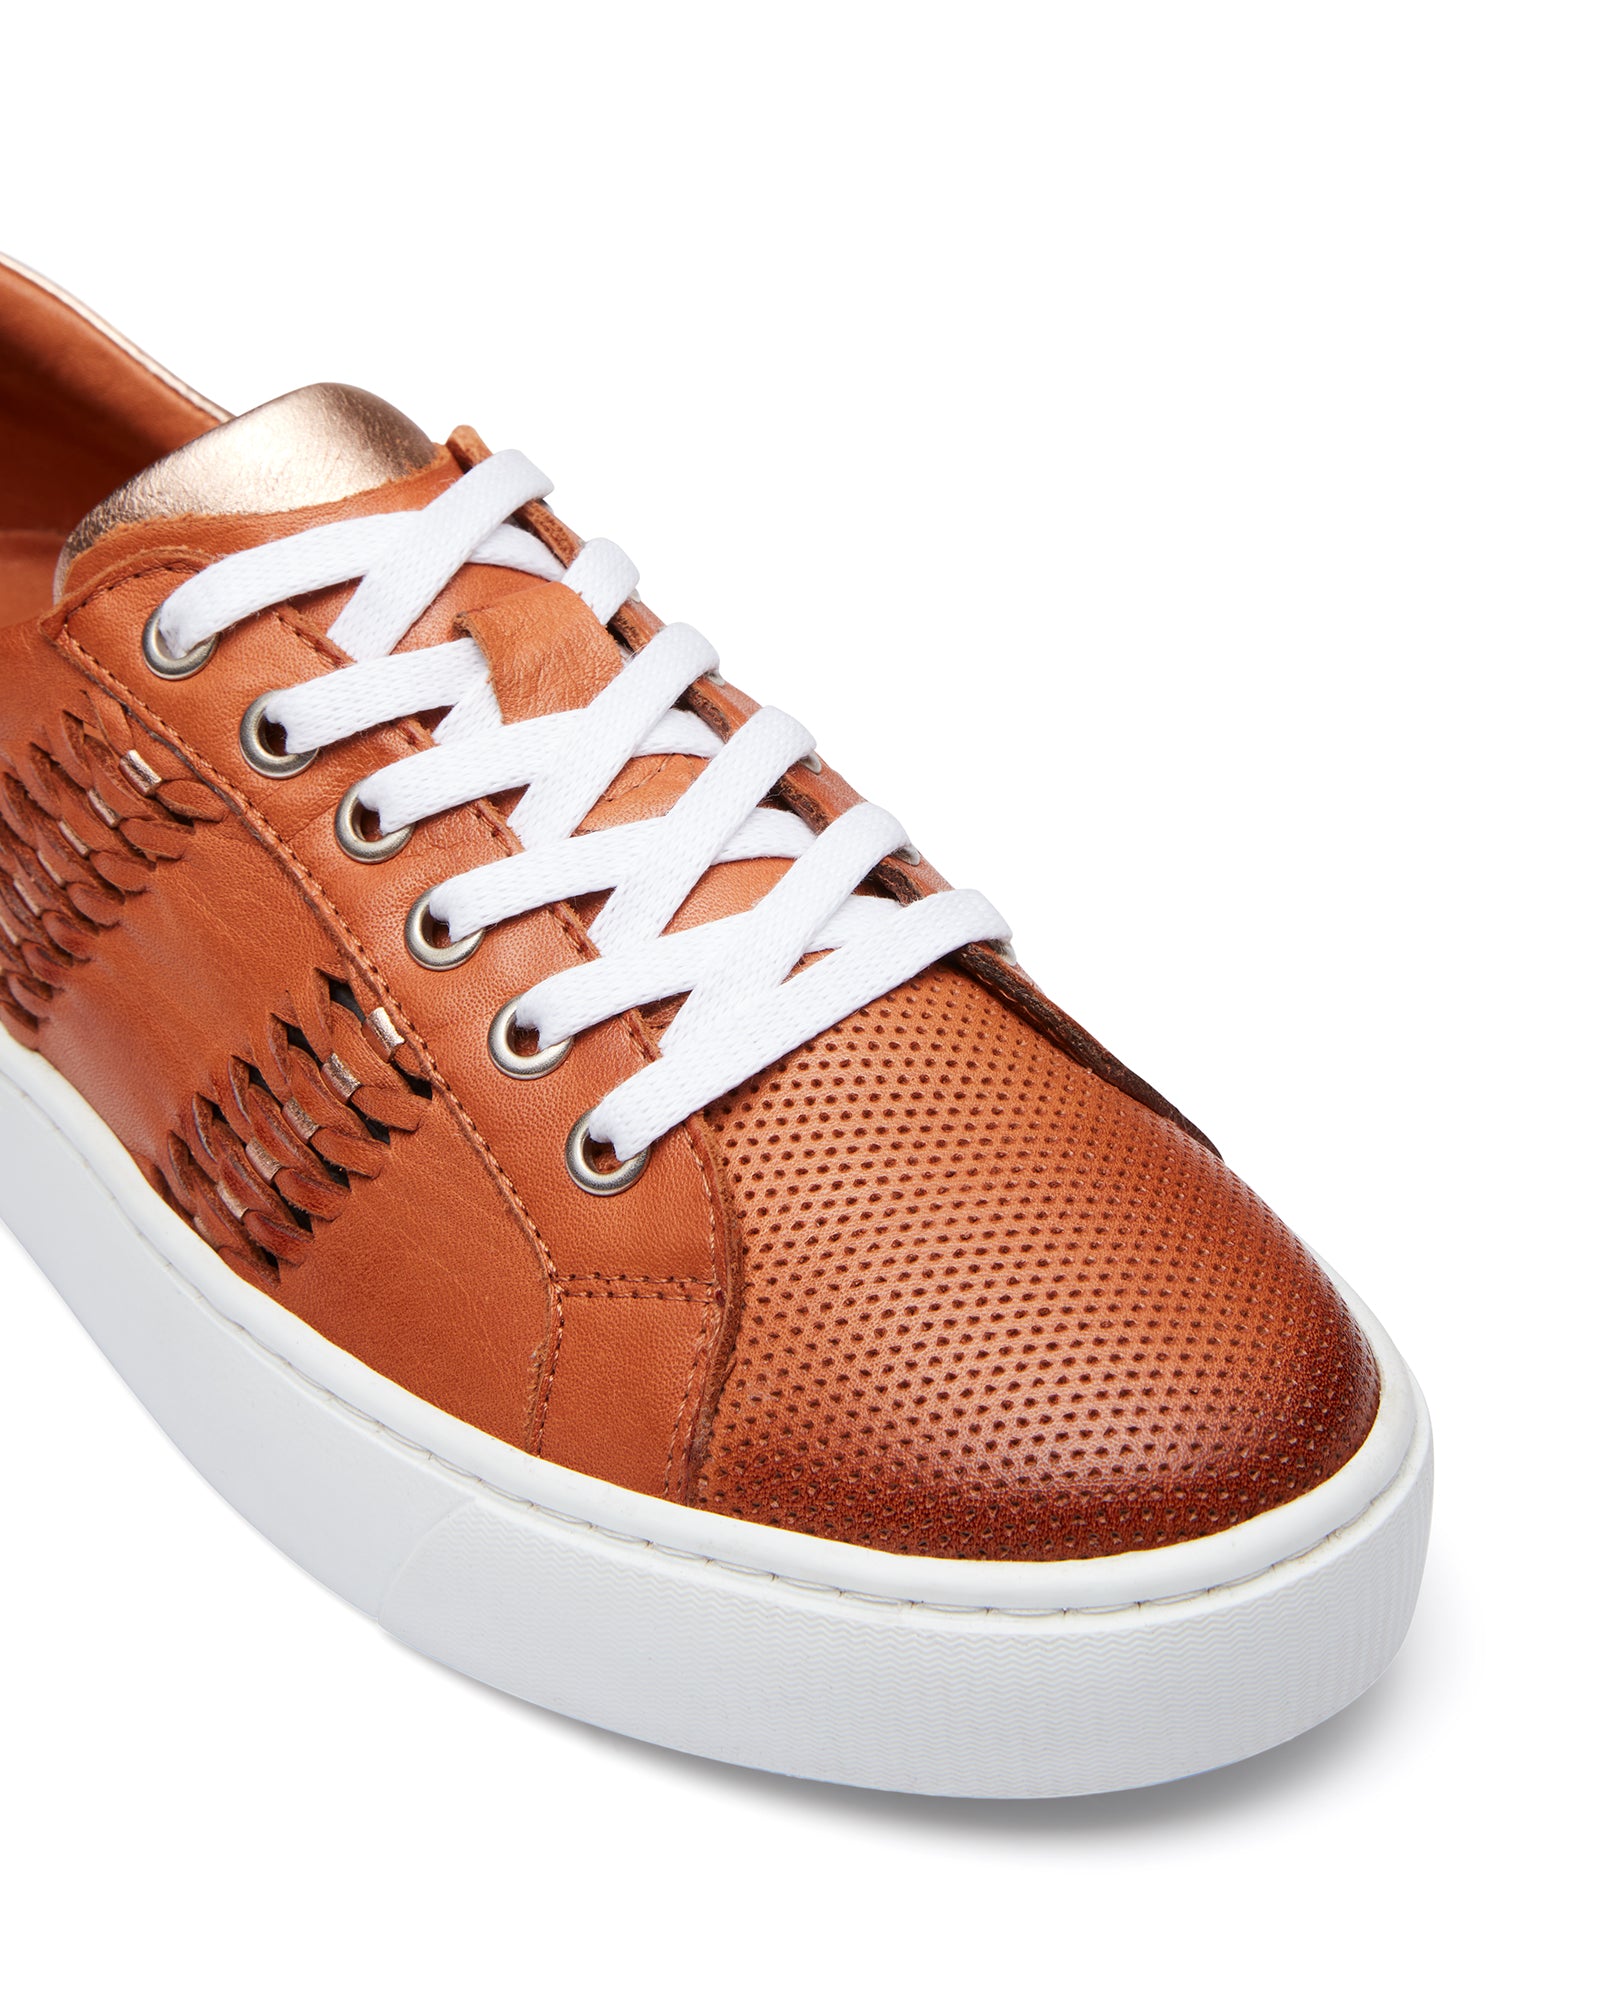 Just Because Shoes Bambi Tan | Leather Sneaker | Lace Up | Low Top